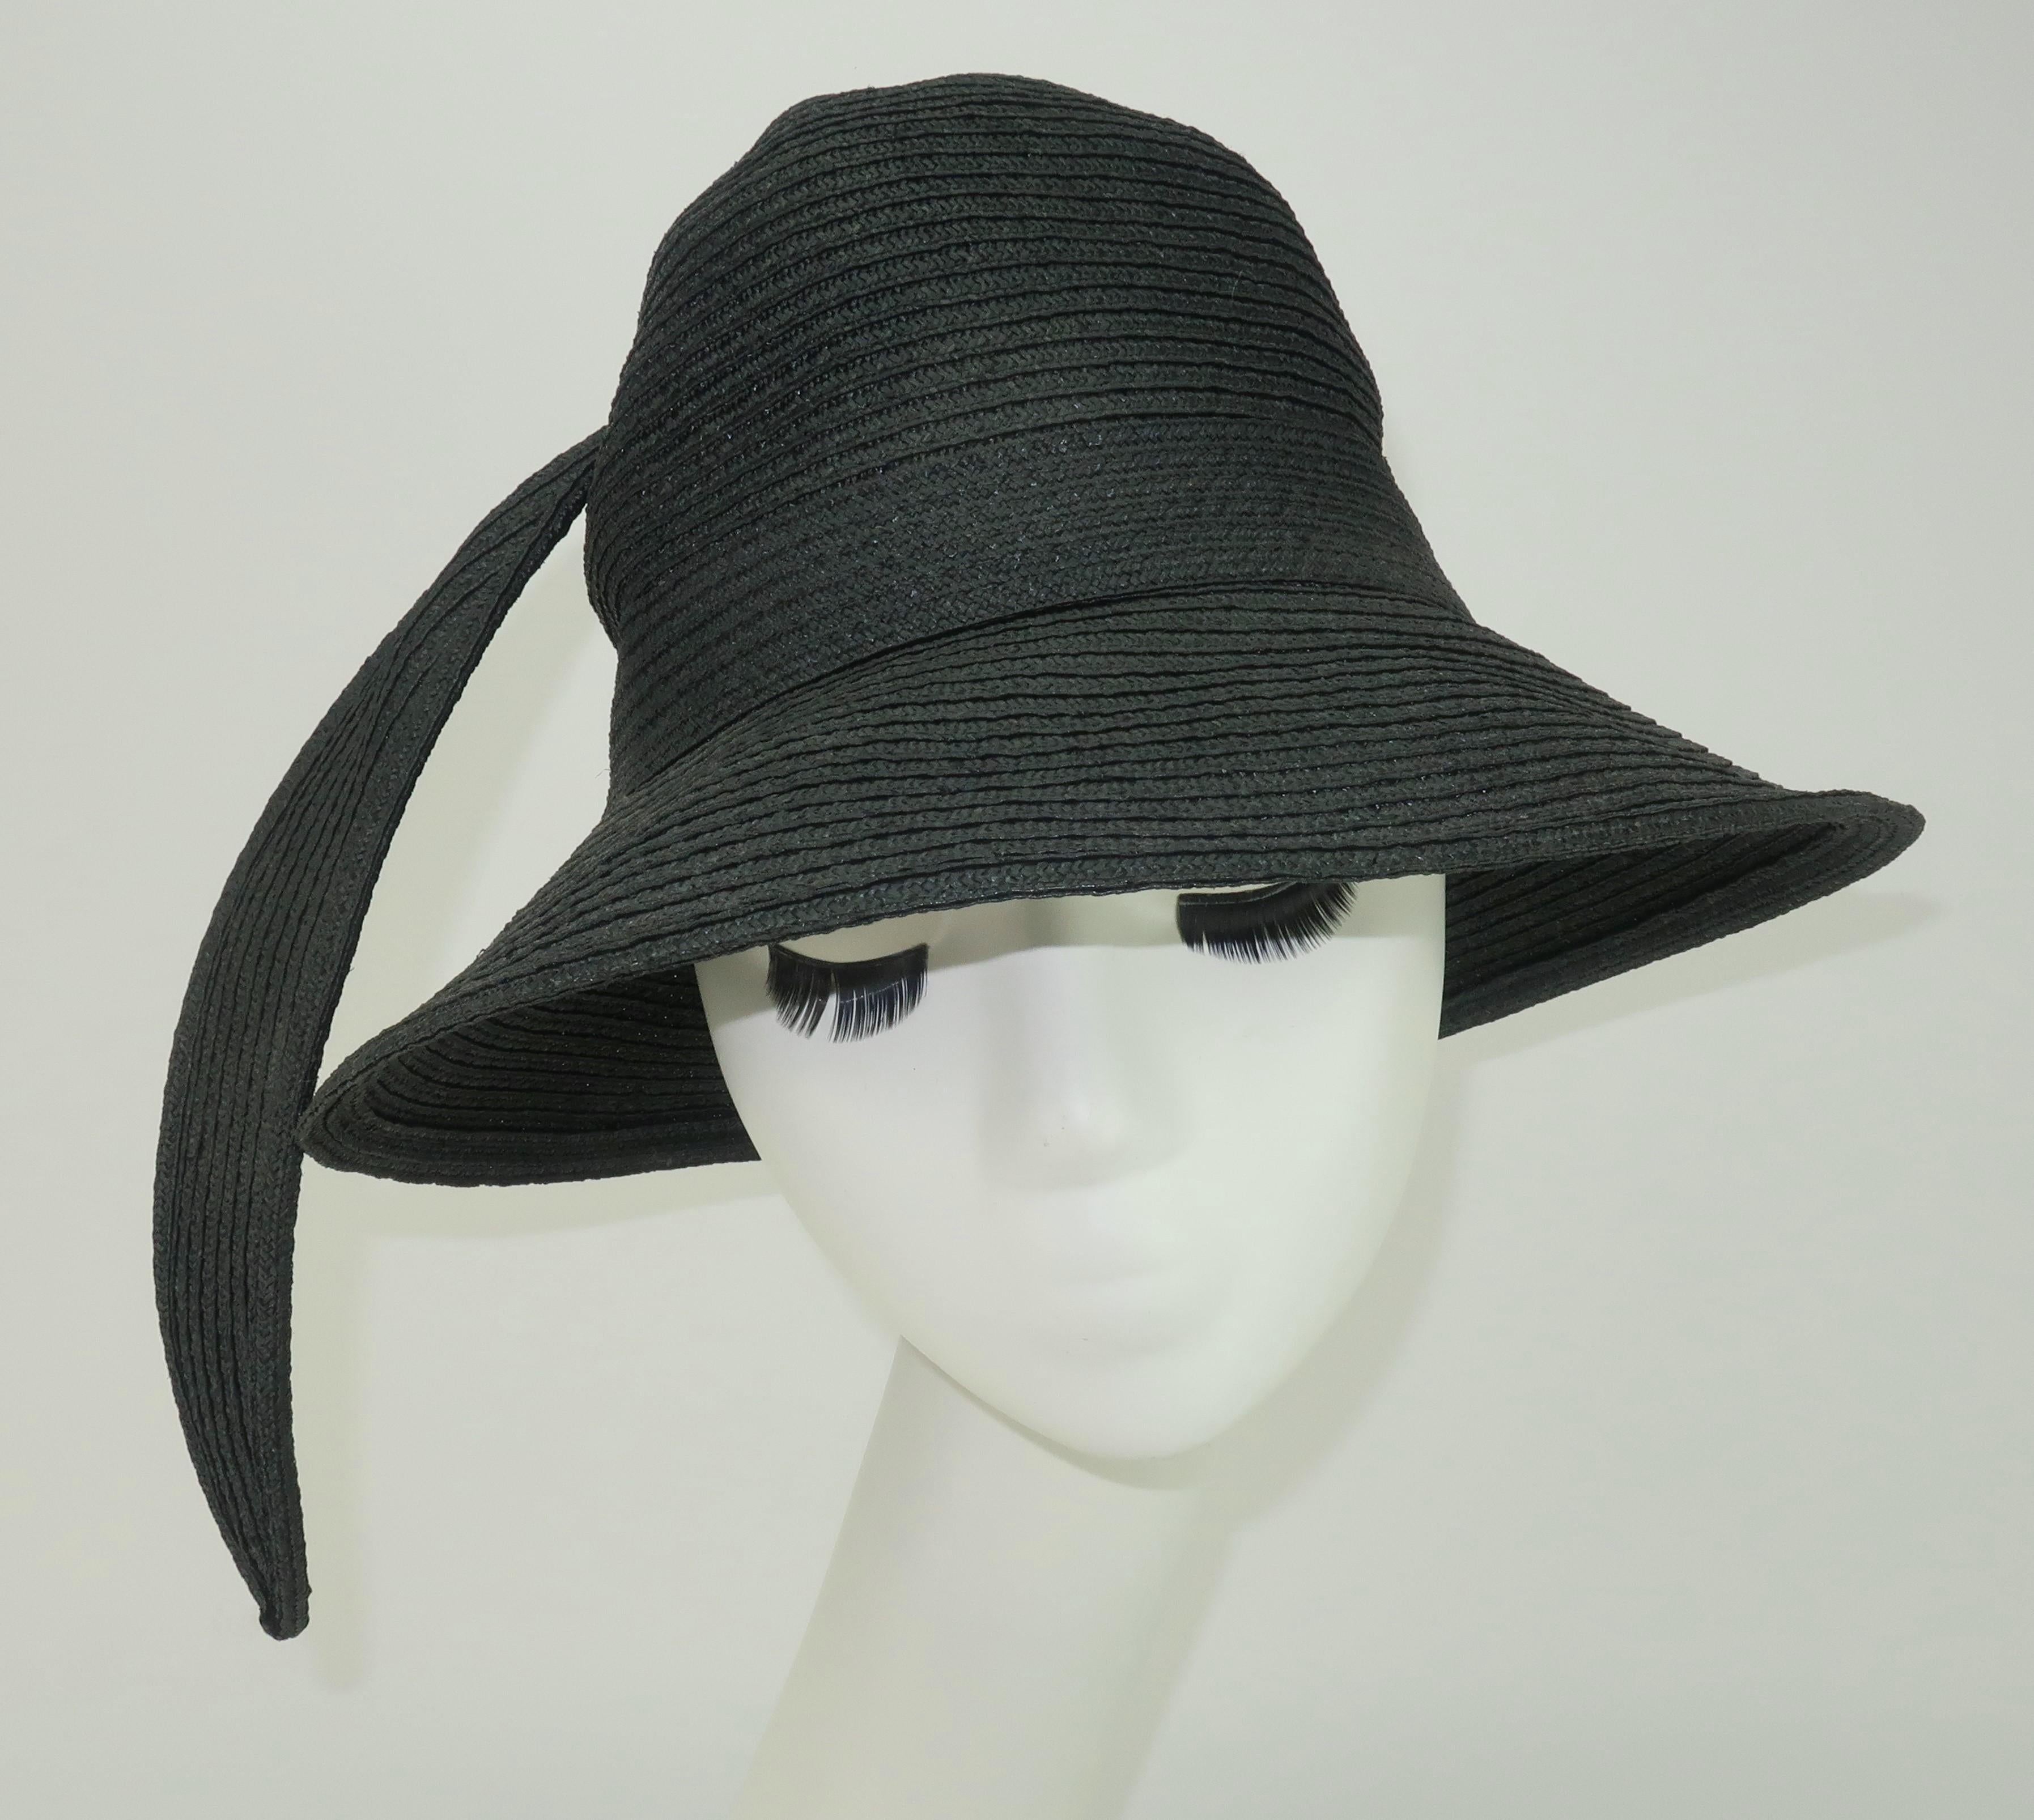 Women's Yves Saint Laurent Black Straw Bucket Hat With Stylized Feather, 1970's